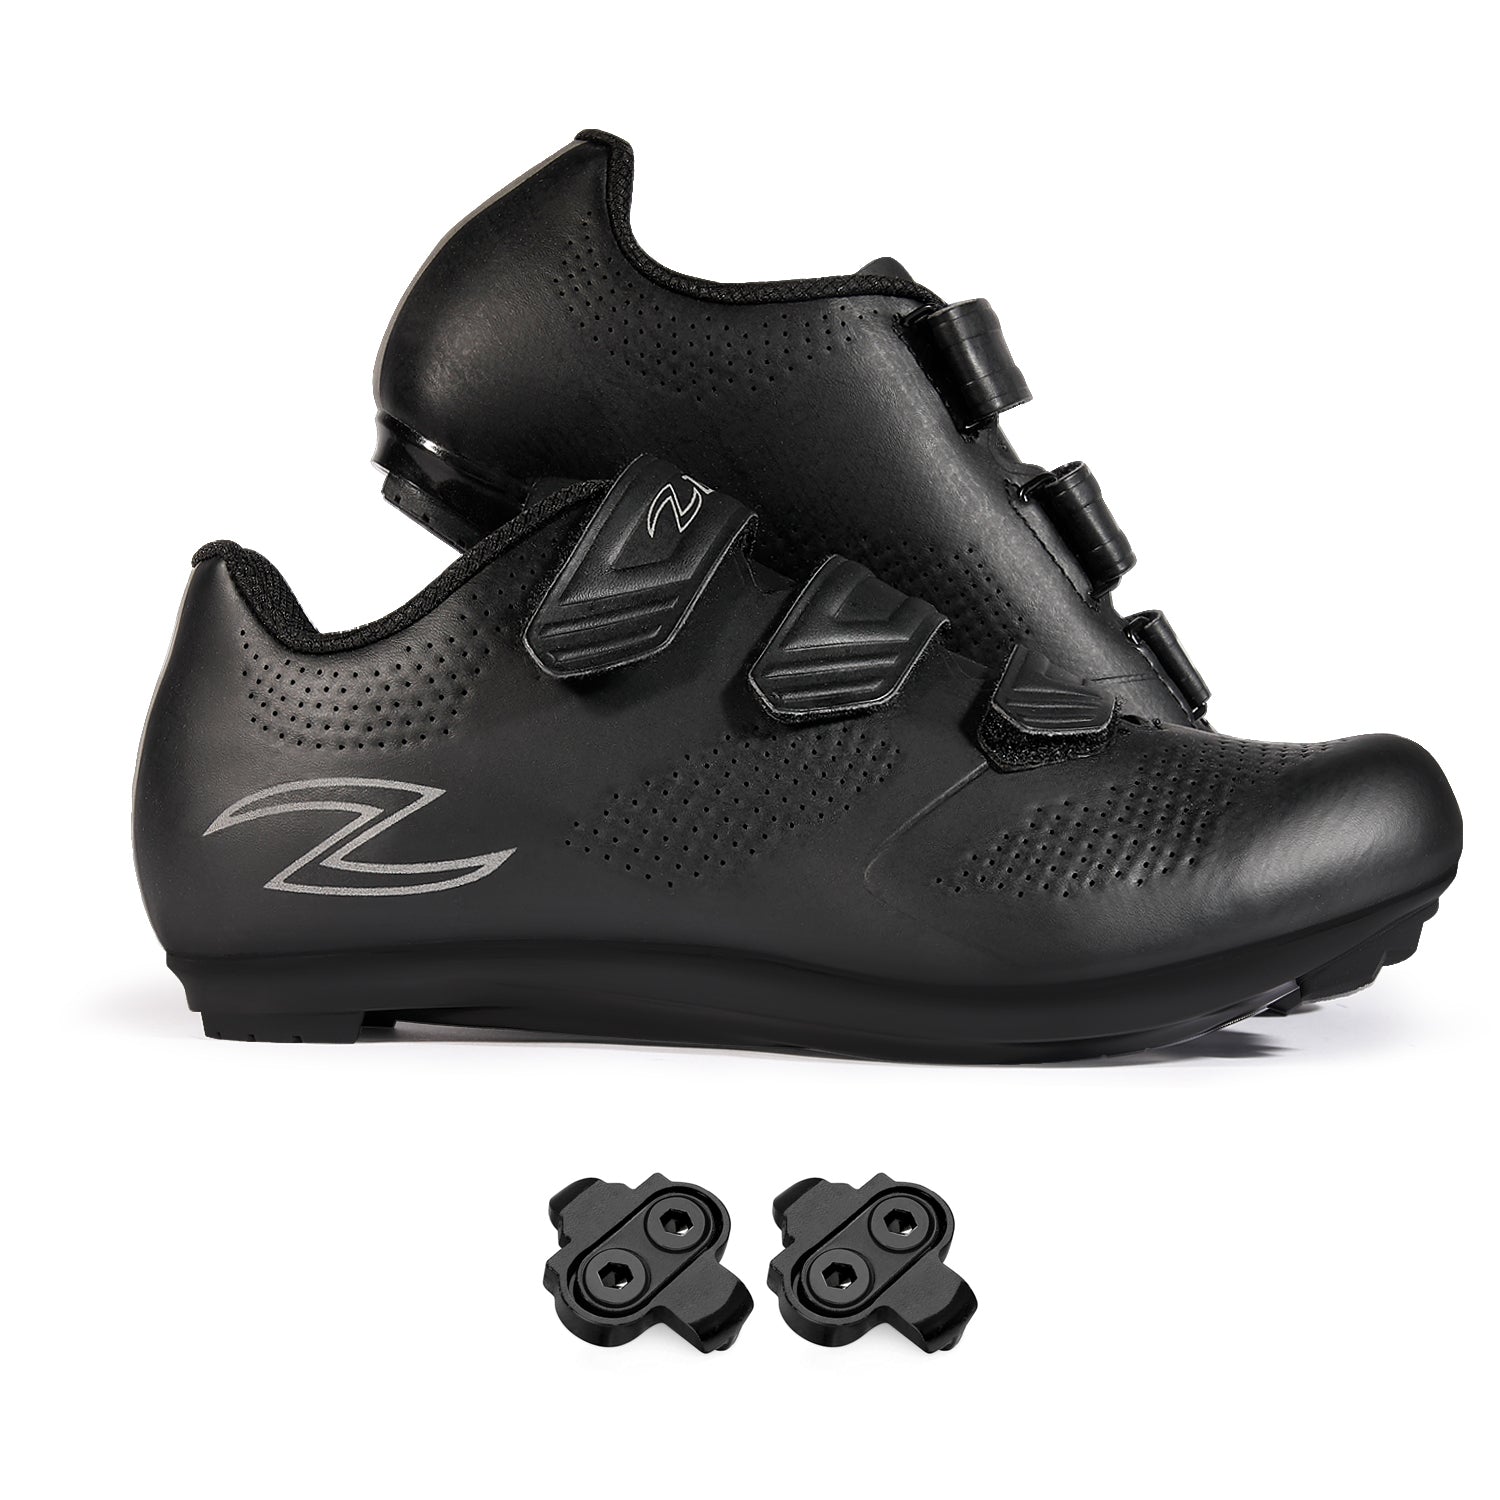 Zol Fondo Road Cycling Shoes with Mtb Spd Cleats - Zol Cycling